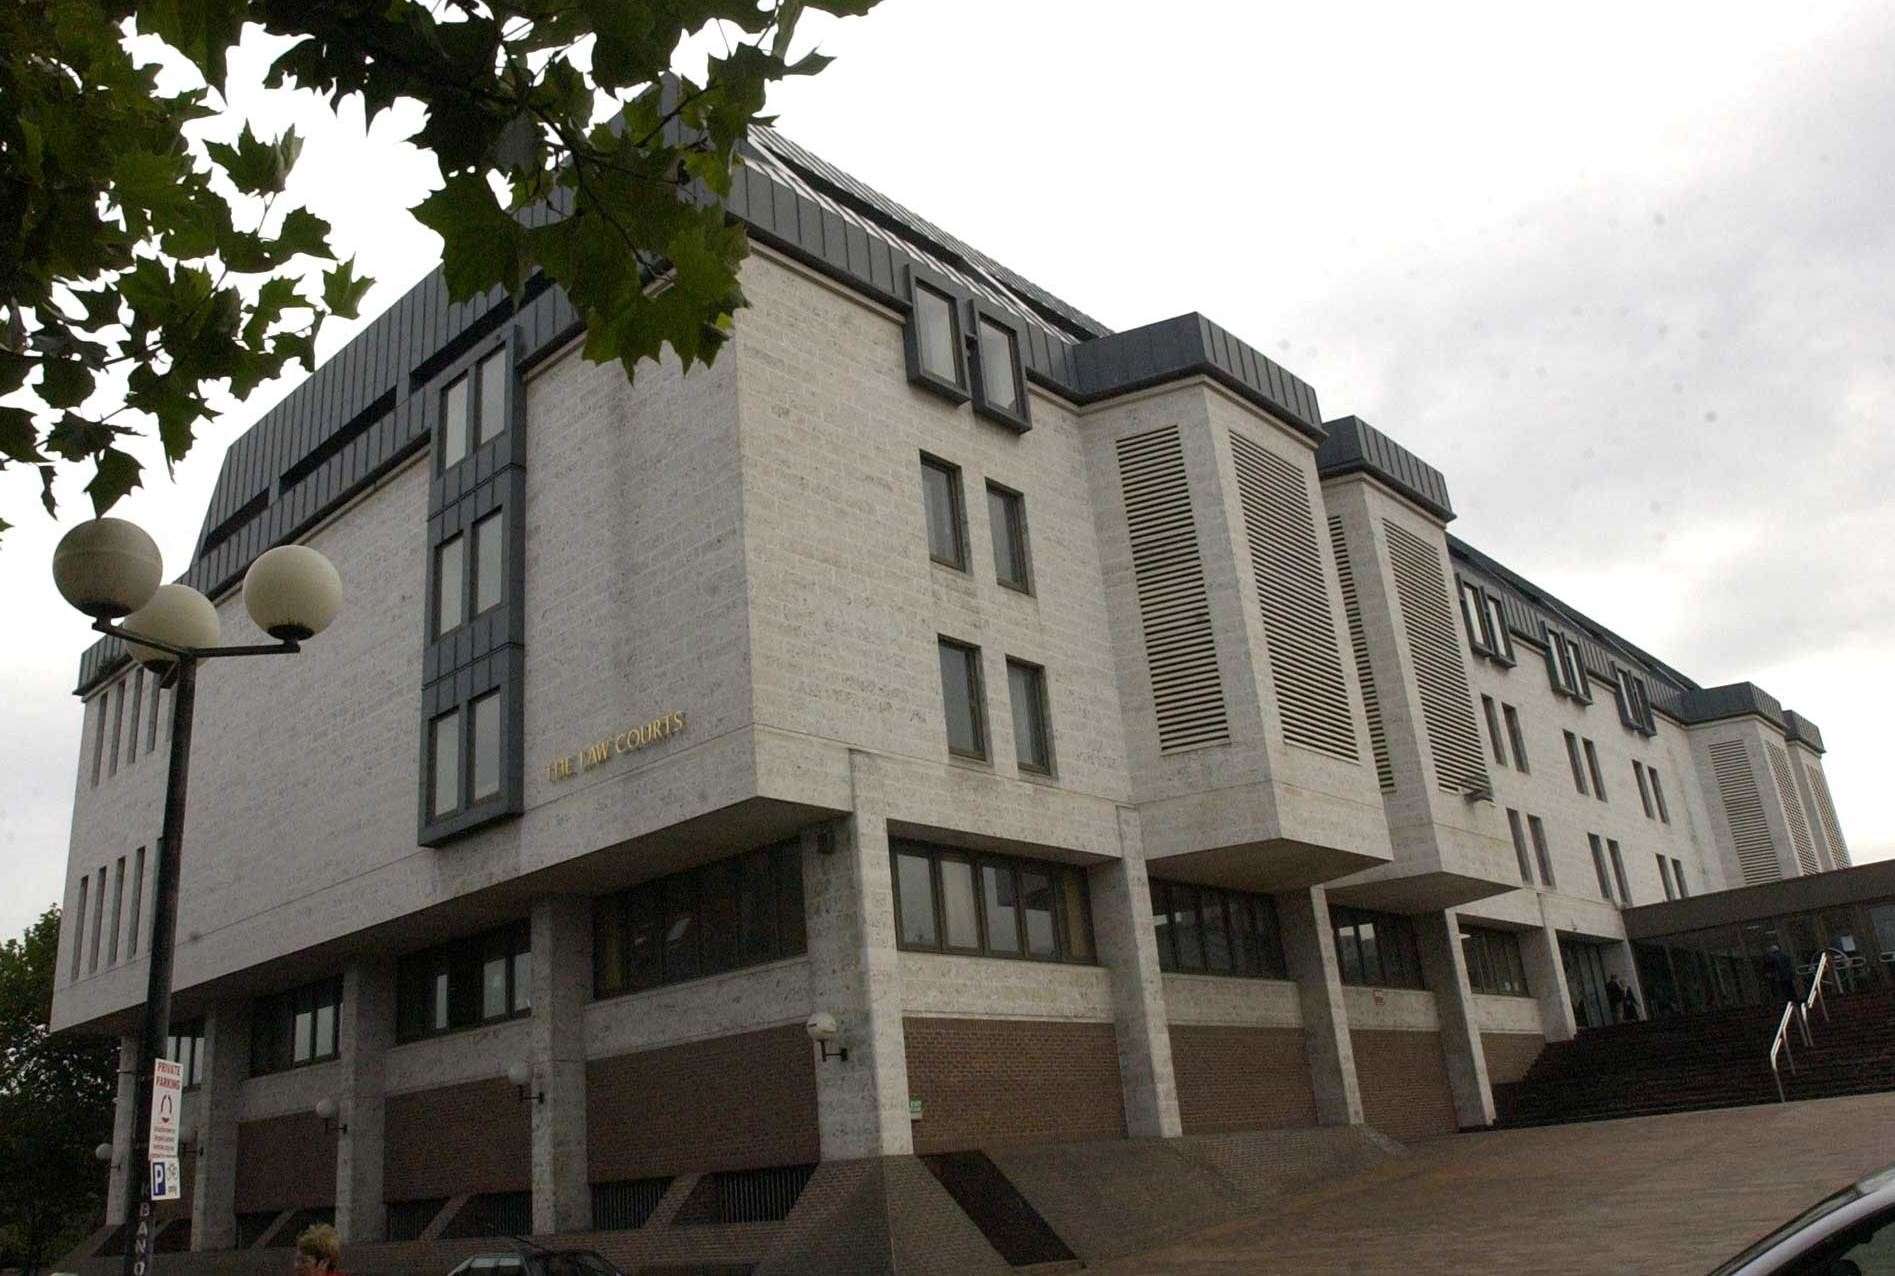 Treays was sentenced at Maidstone Crown Court